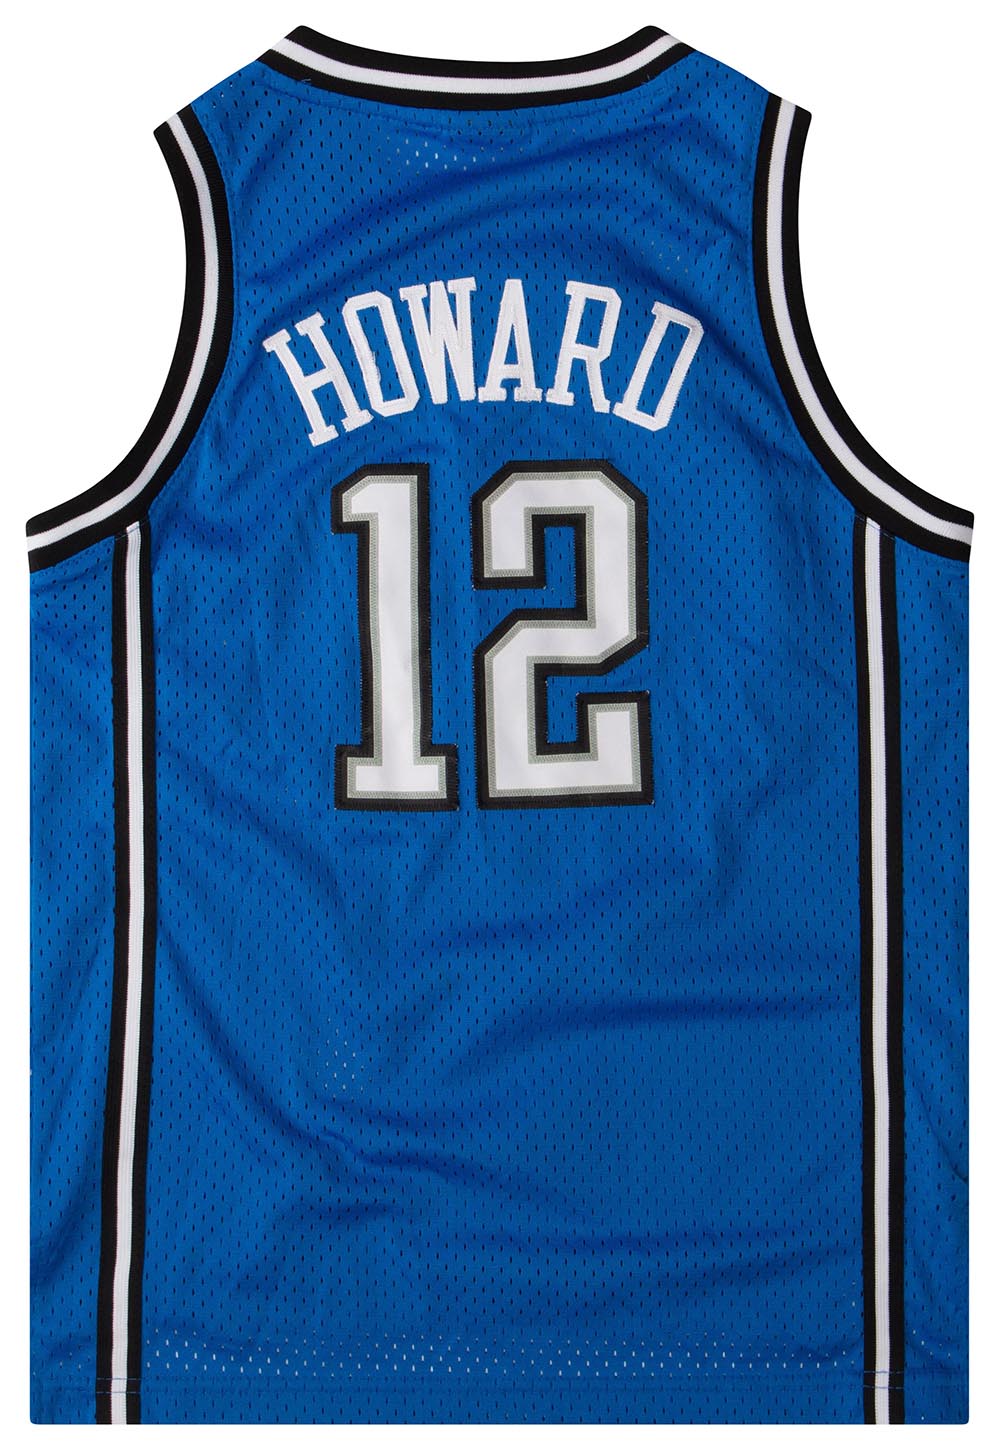 Orlando Magic Basketball Jersey by Adidas-Howard 12 - SportingPlus -  Passion for Sport